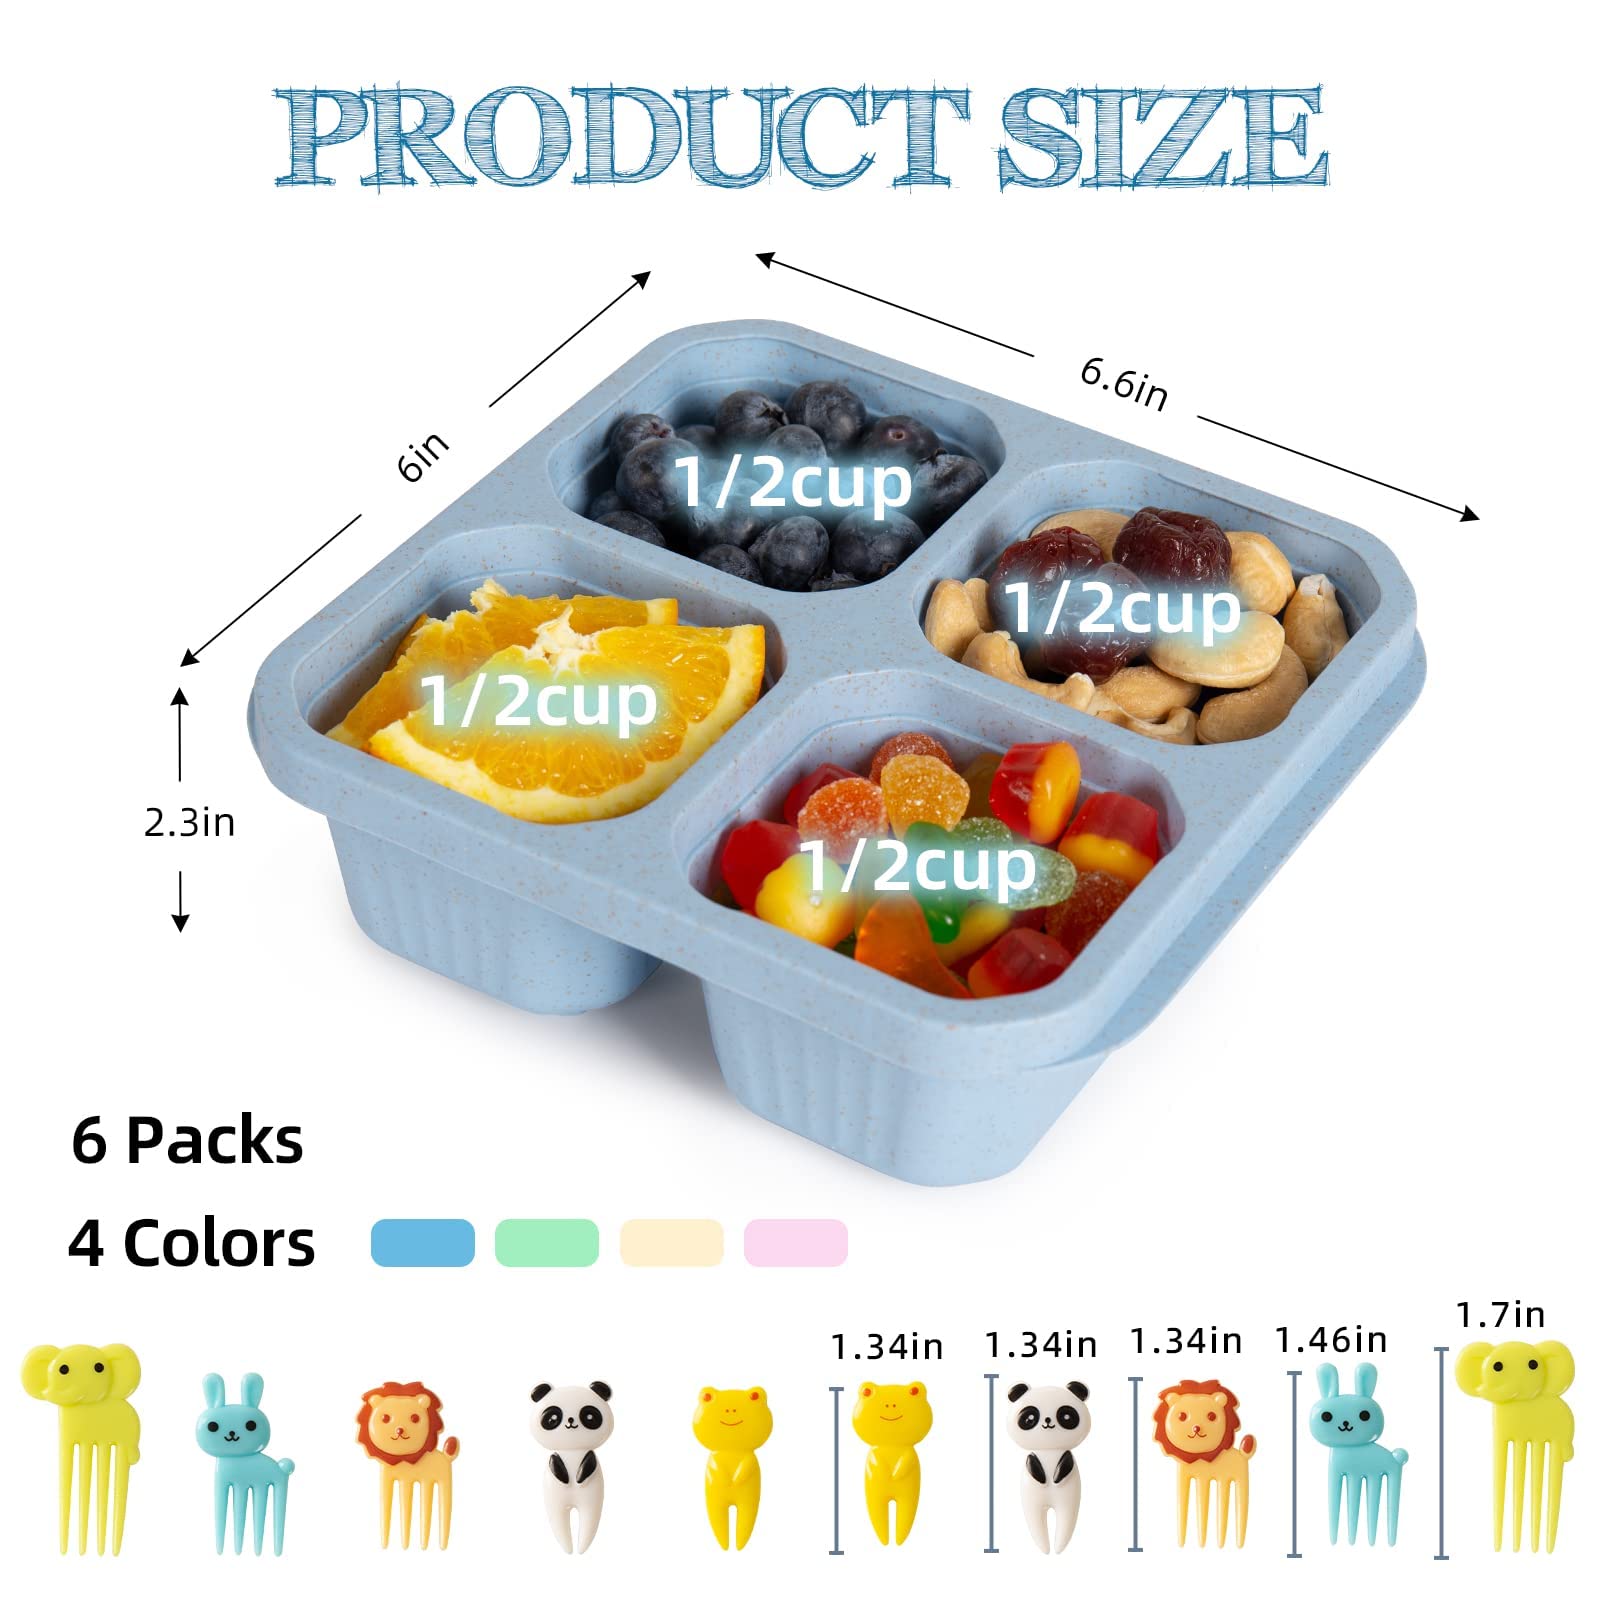 DESLON 6 Pack Snack Containers for Adults Kids, 4 Compartment Bento Snack Box, Reusable Meal Prep Lunch Containers with Compartment, Divided Small Snack Containers Bento Box for Travel Work